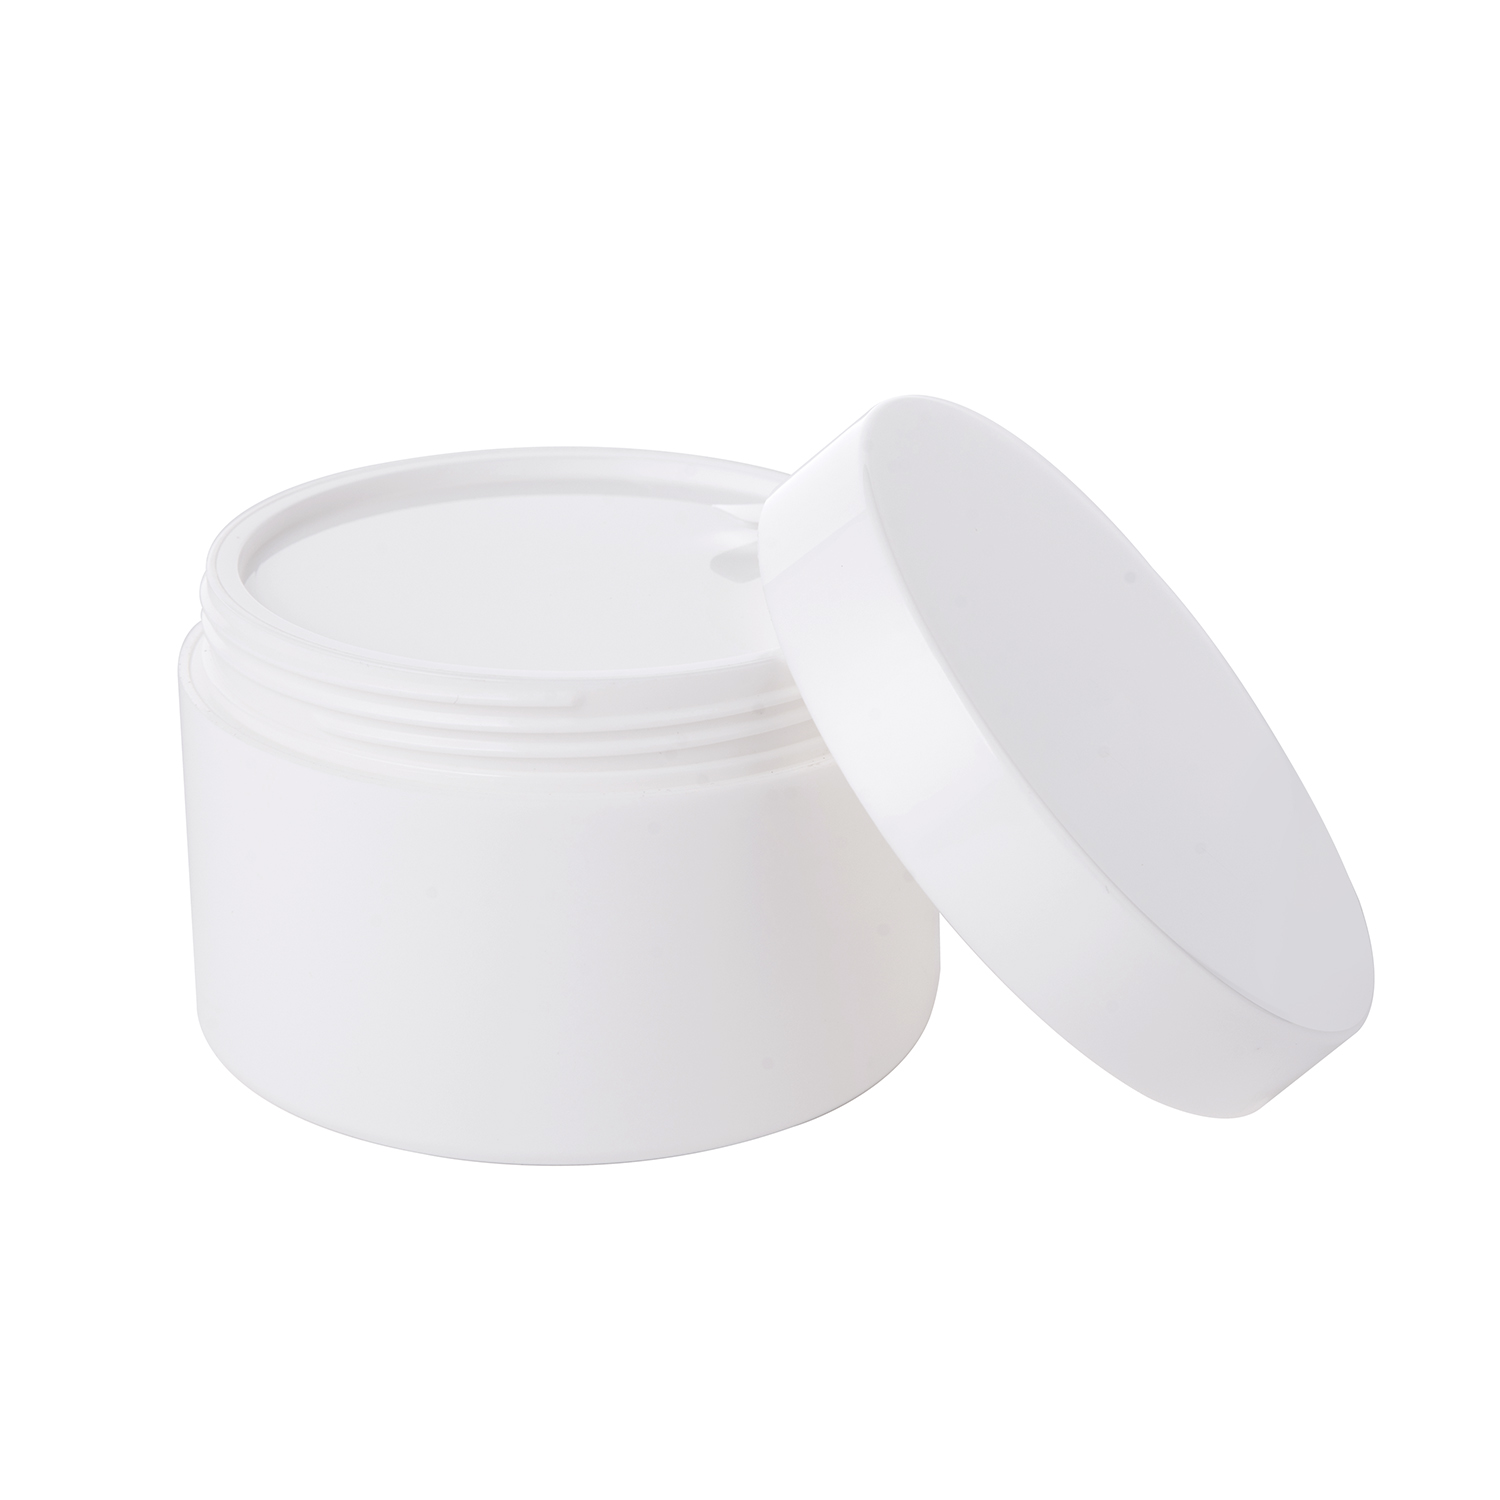 Recycleable PP（30%—100%PCR） Cosmetic Jar High Quality Round Cosmetic Packaging Wholesale PCR Cosmetic Jar